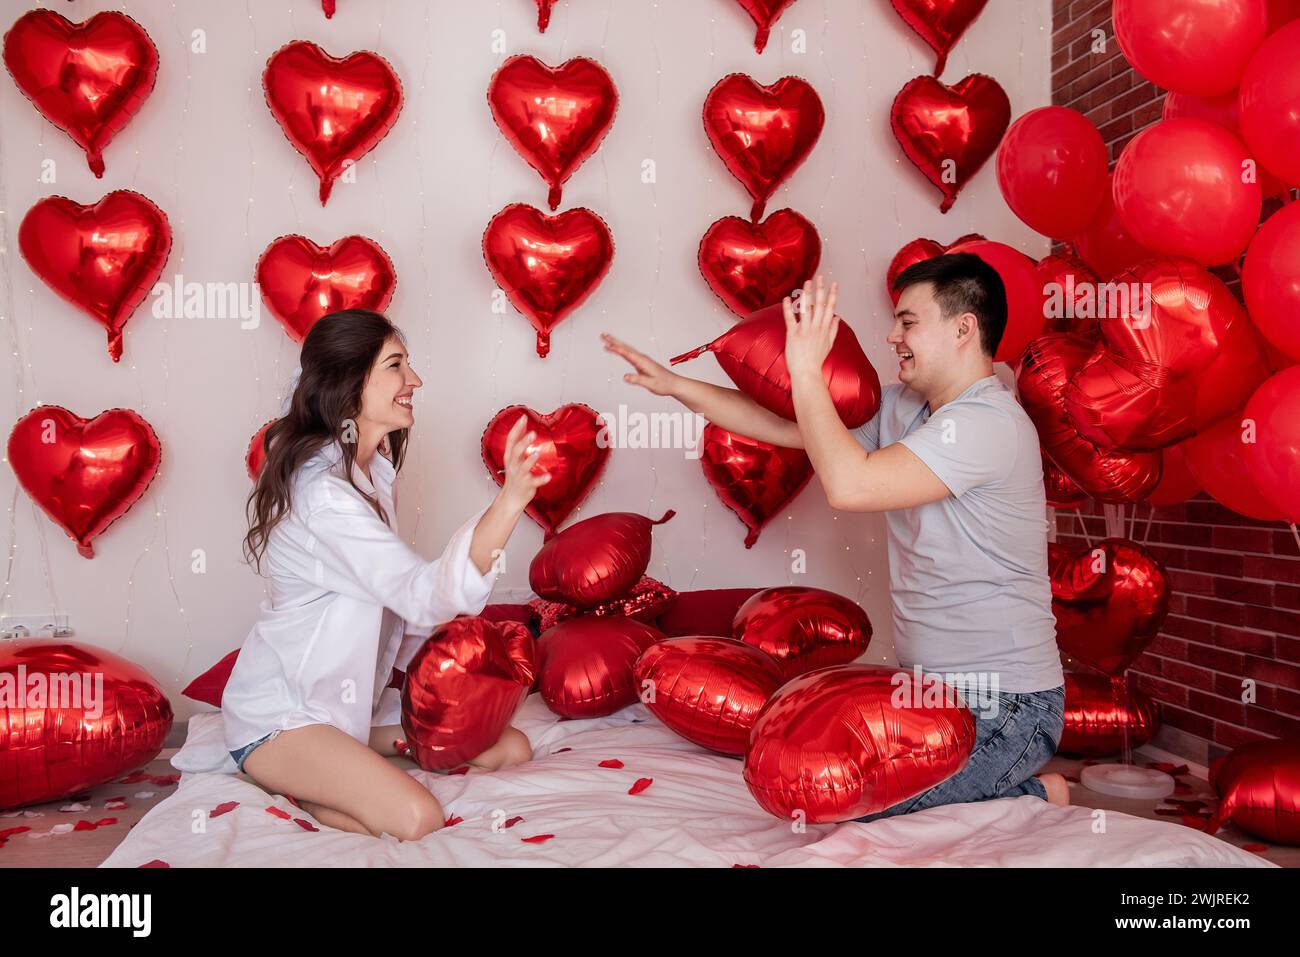 Playful moment between couple engaging in pillow balloons fight on bed, with heart shaped red balloons in background. Woman is joyfully fooling around Stock Photo